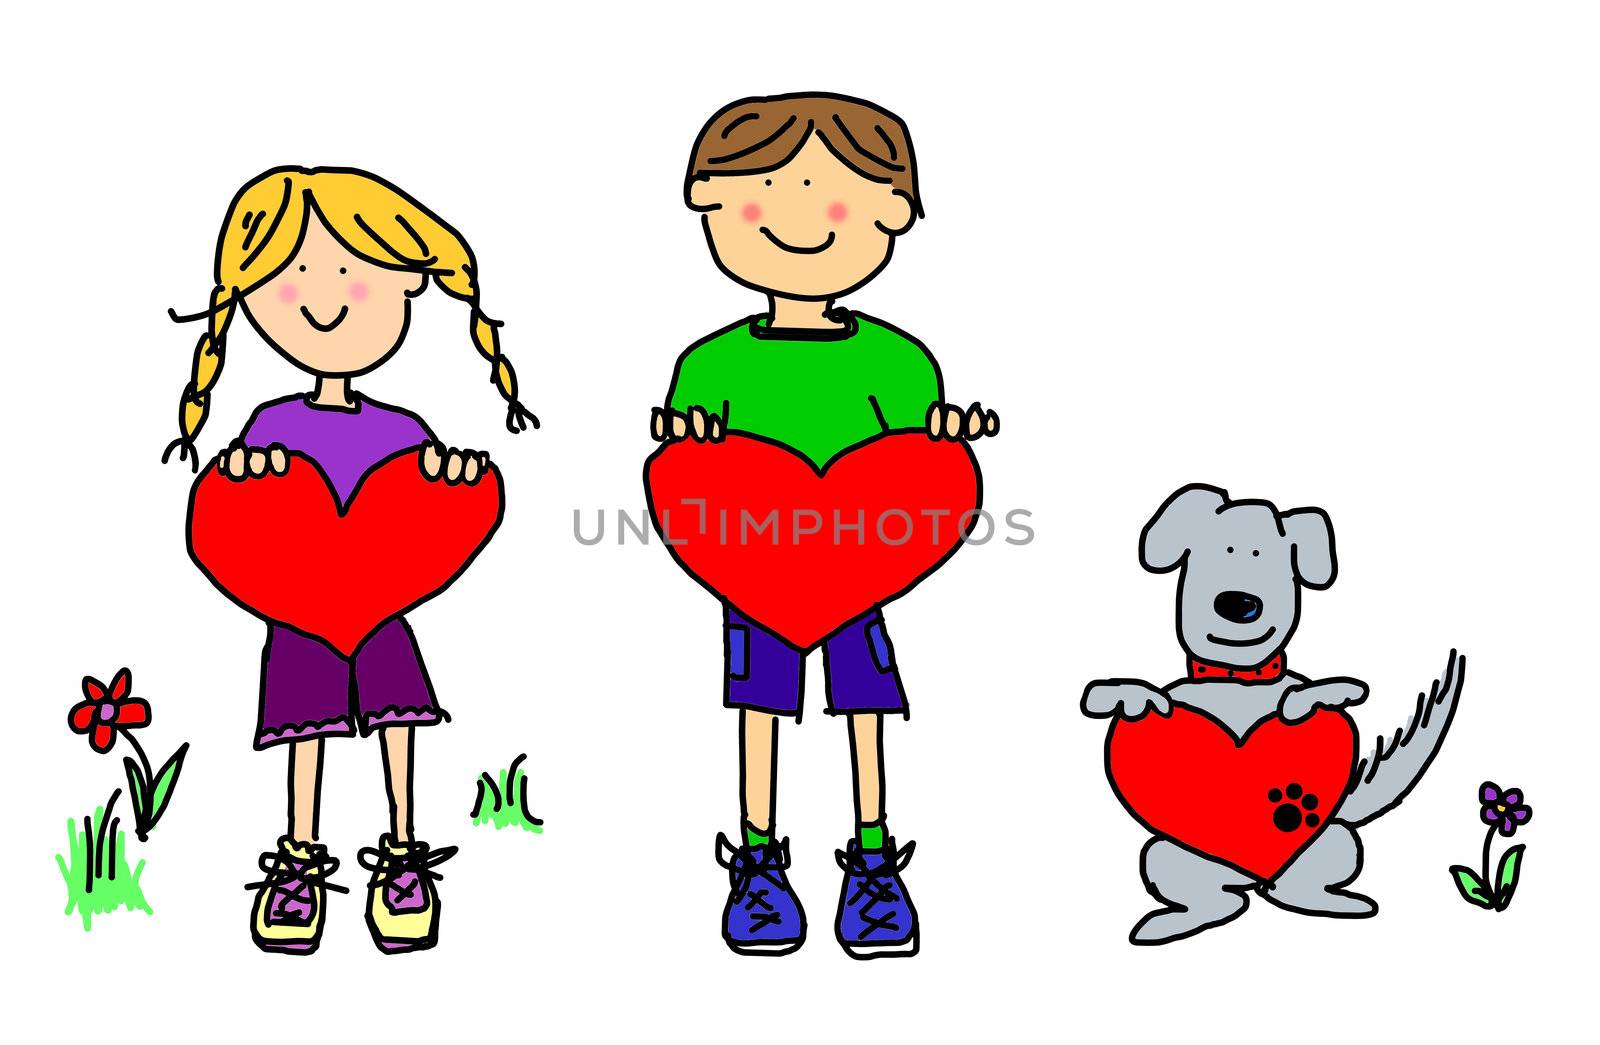 Boy, girl, and dog cartoon holding heart shape sign by Mirage3